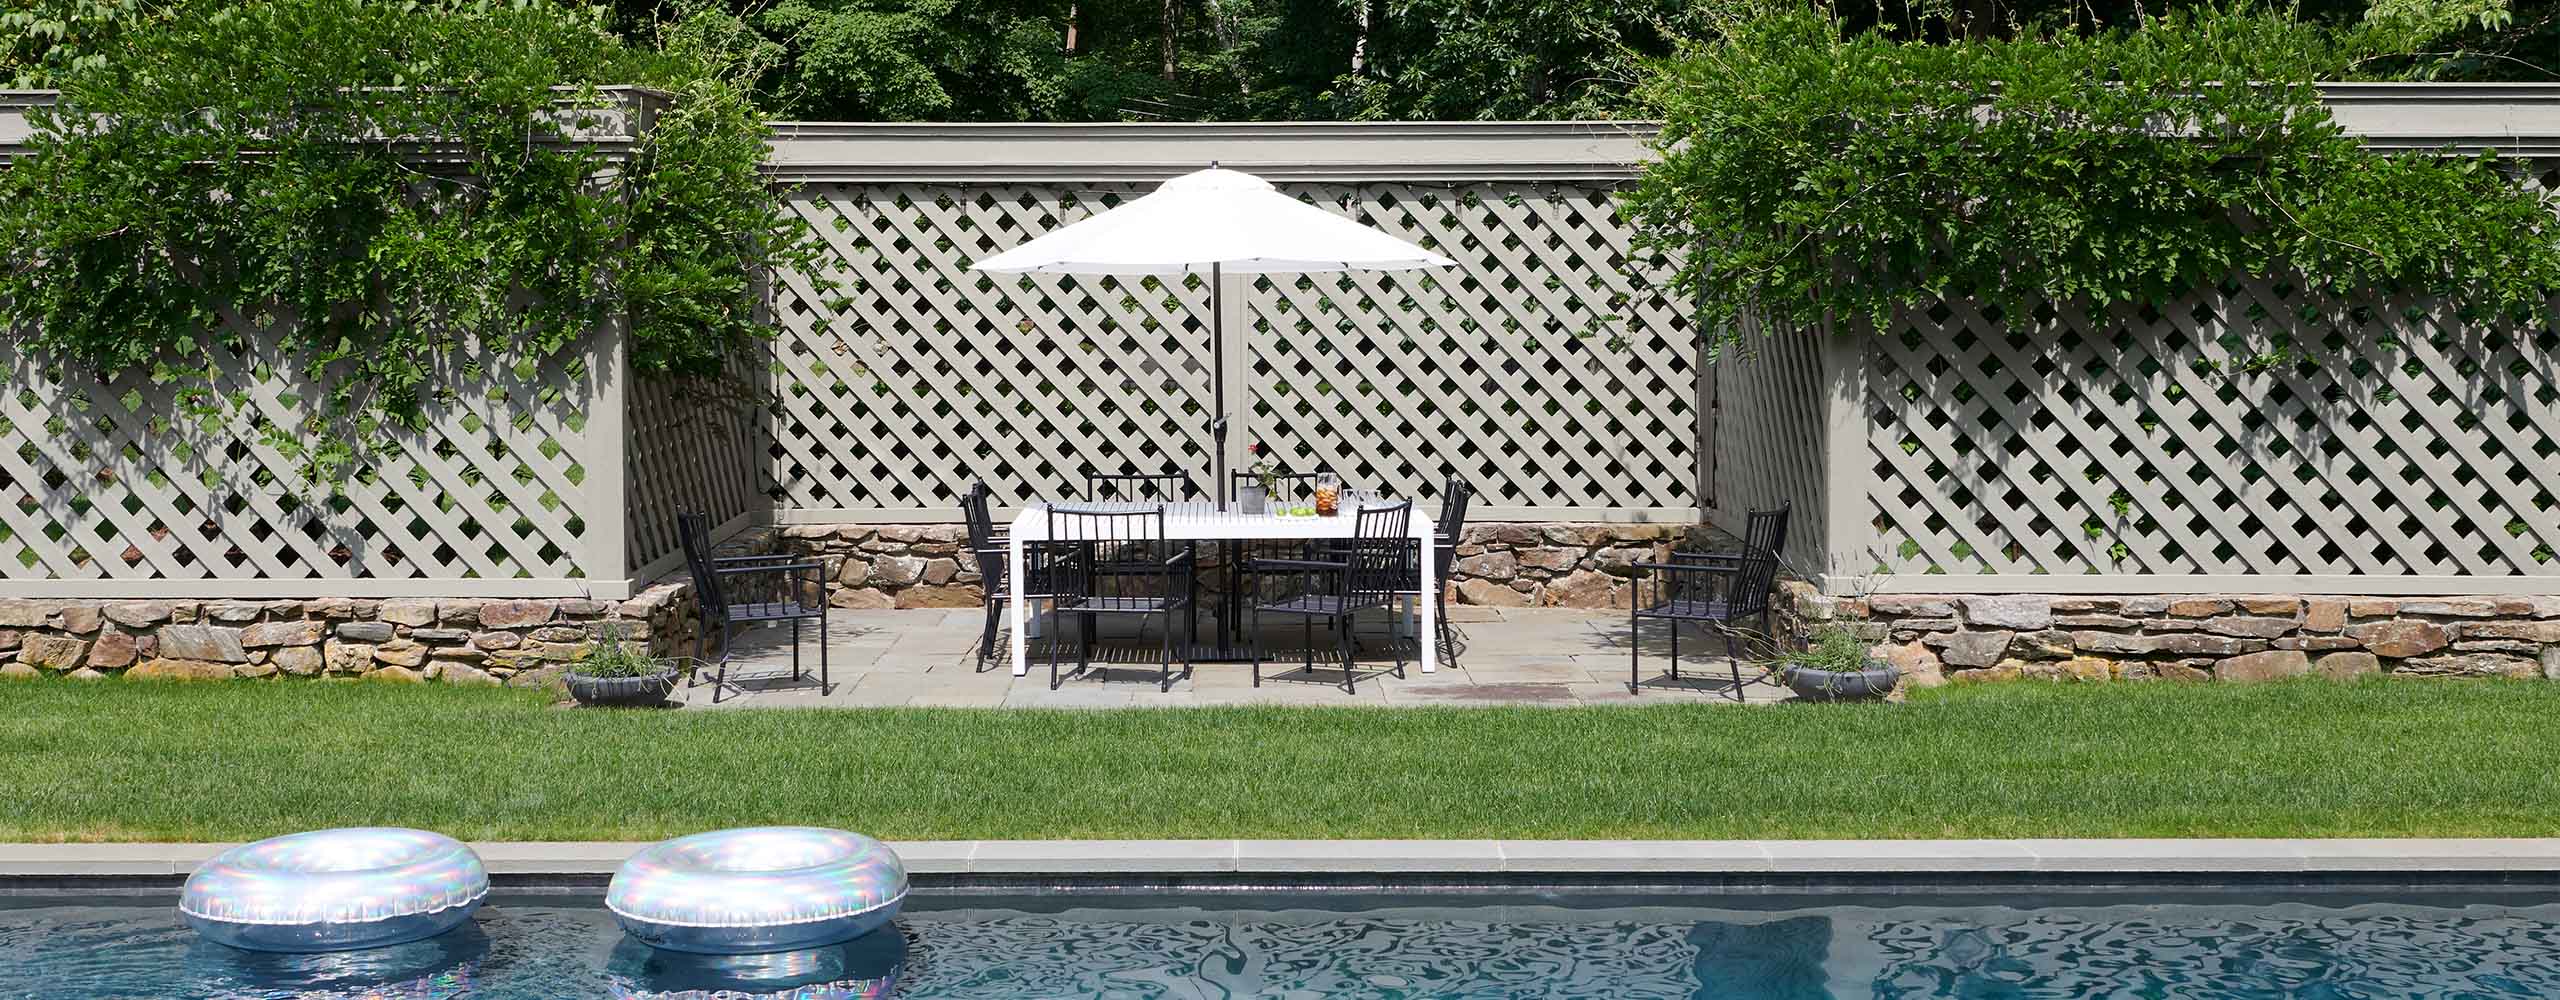 A beautiful gray-painted trellis style fence with climbing greenery offers privacy in this yard with a pool and outdoor patio with dining furniture and a white umbrella.